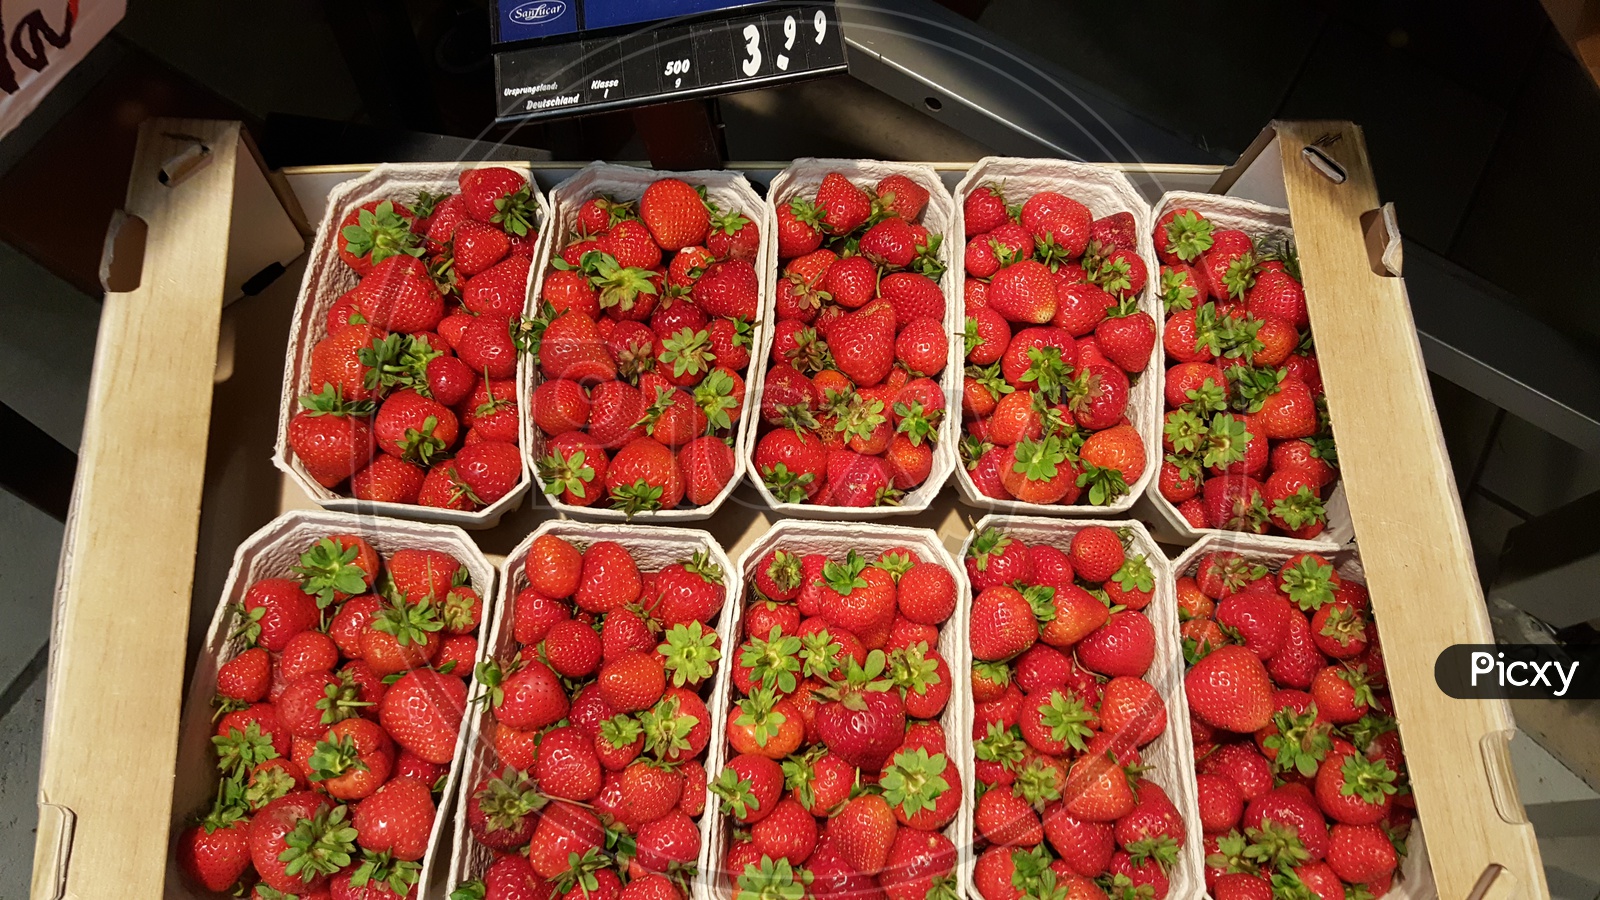 Strawberry Fruits in a Store